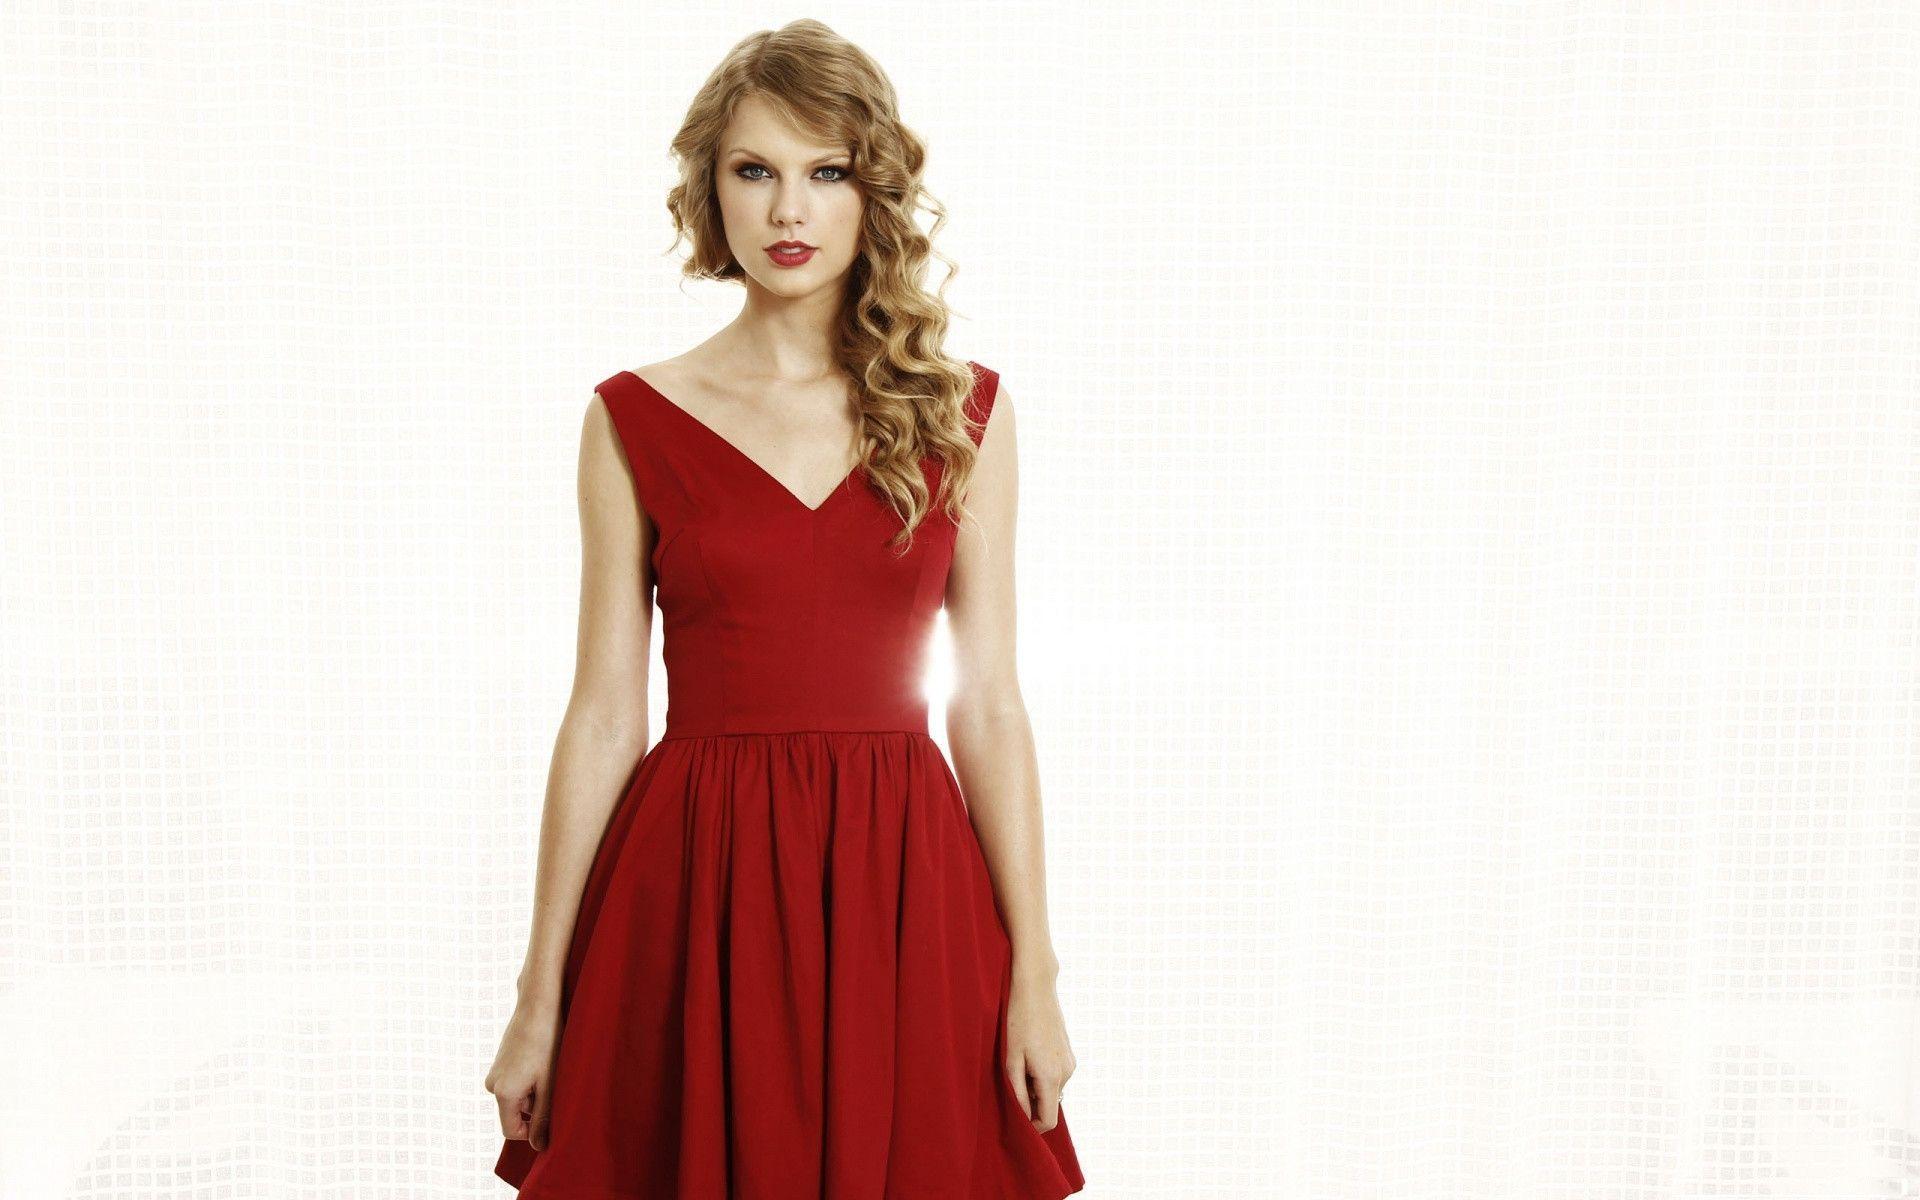 Taylor Swift Background in 1920x1200 Resolution